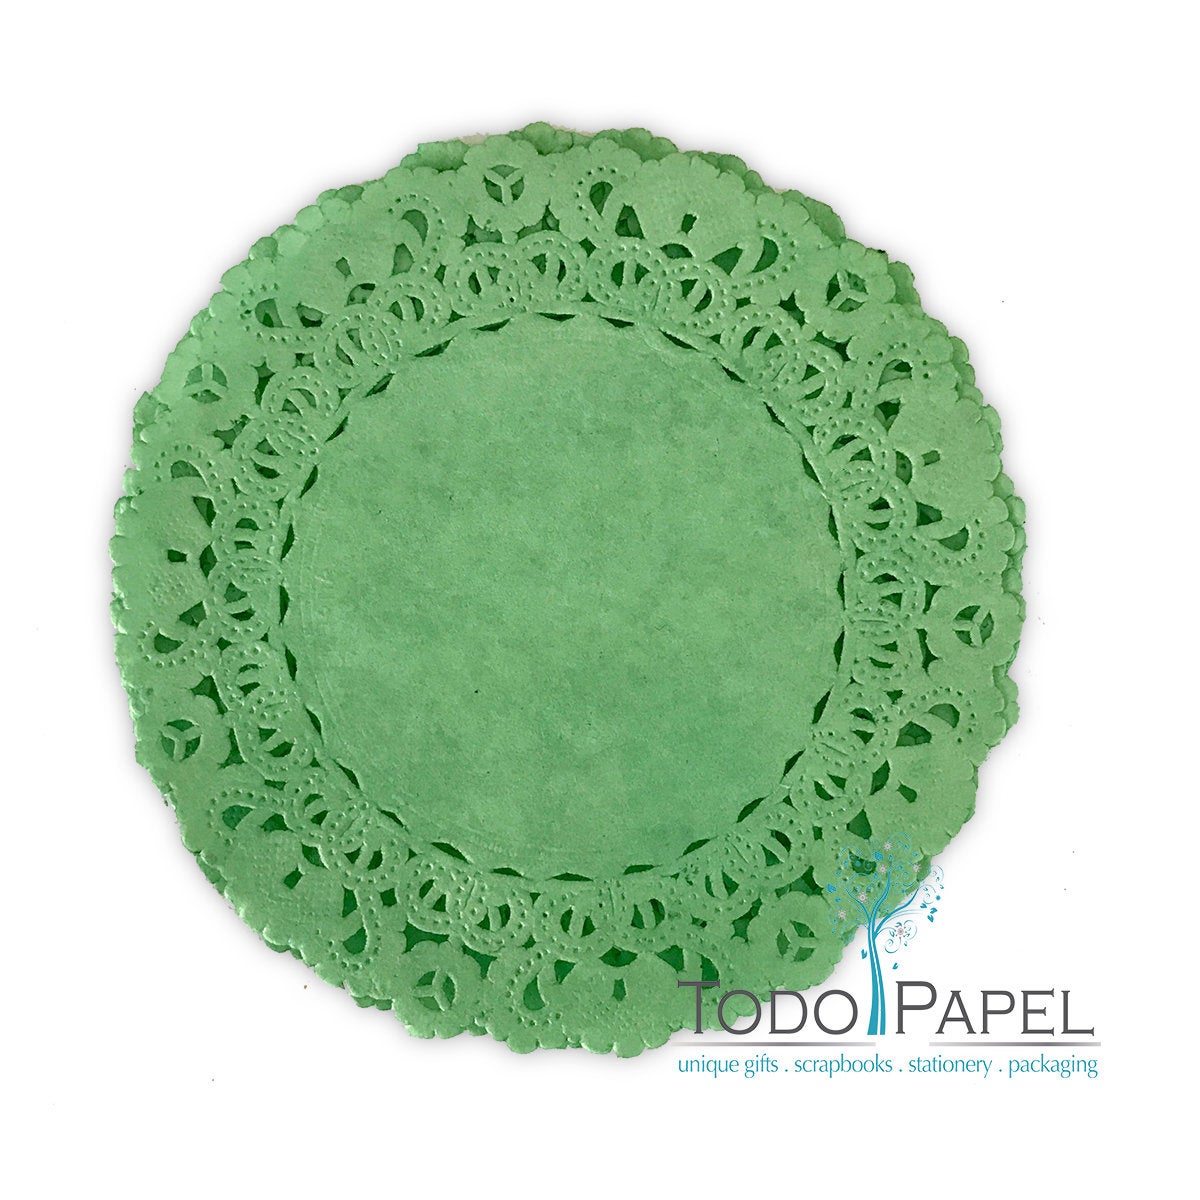 50 Pack - 12 Inch Normandy Style Kelly Green Paper Lace Doilies - Great As Table Décor Plate Chargers, Placemats, And Centerpieces For Wedding